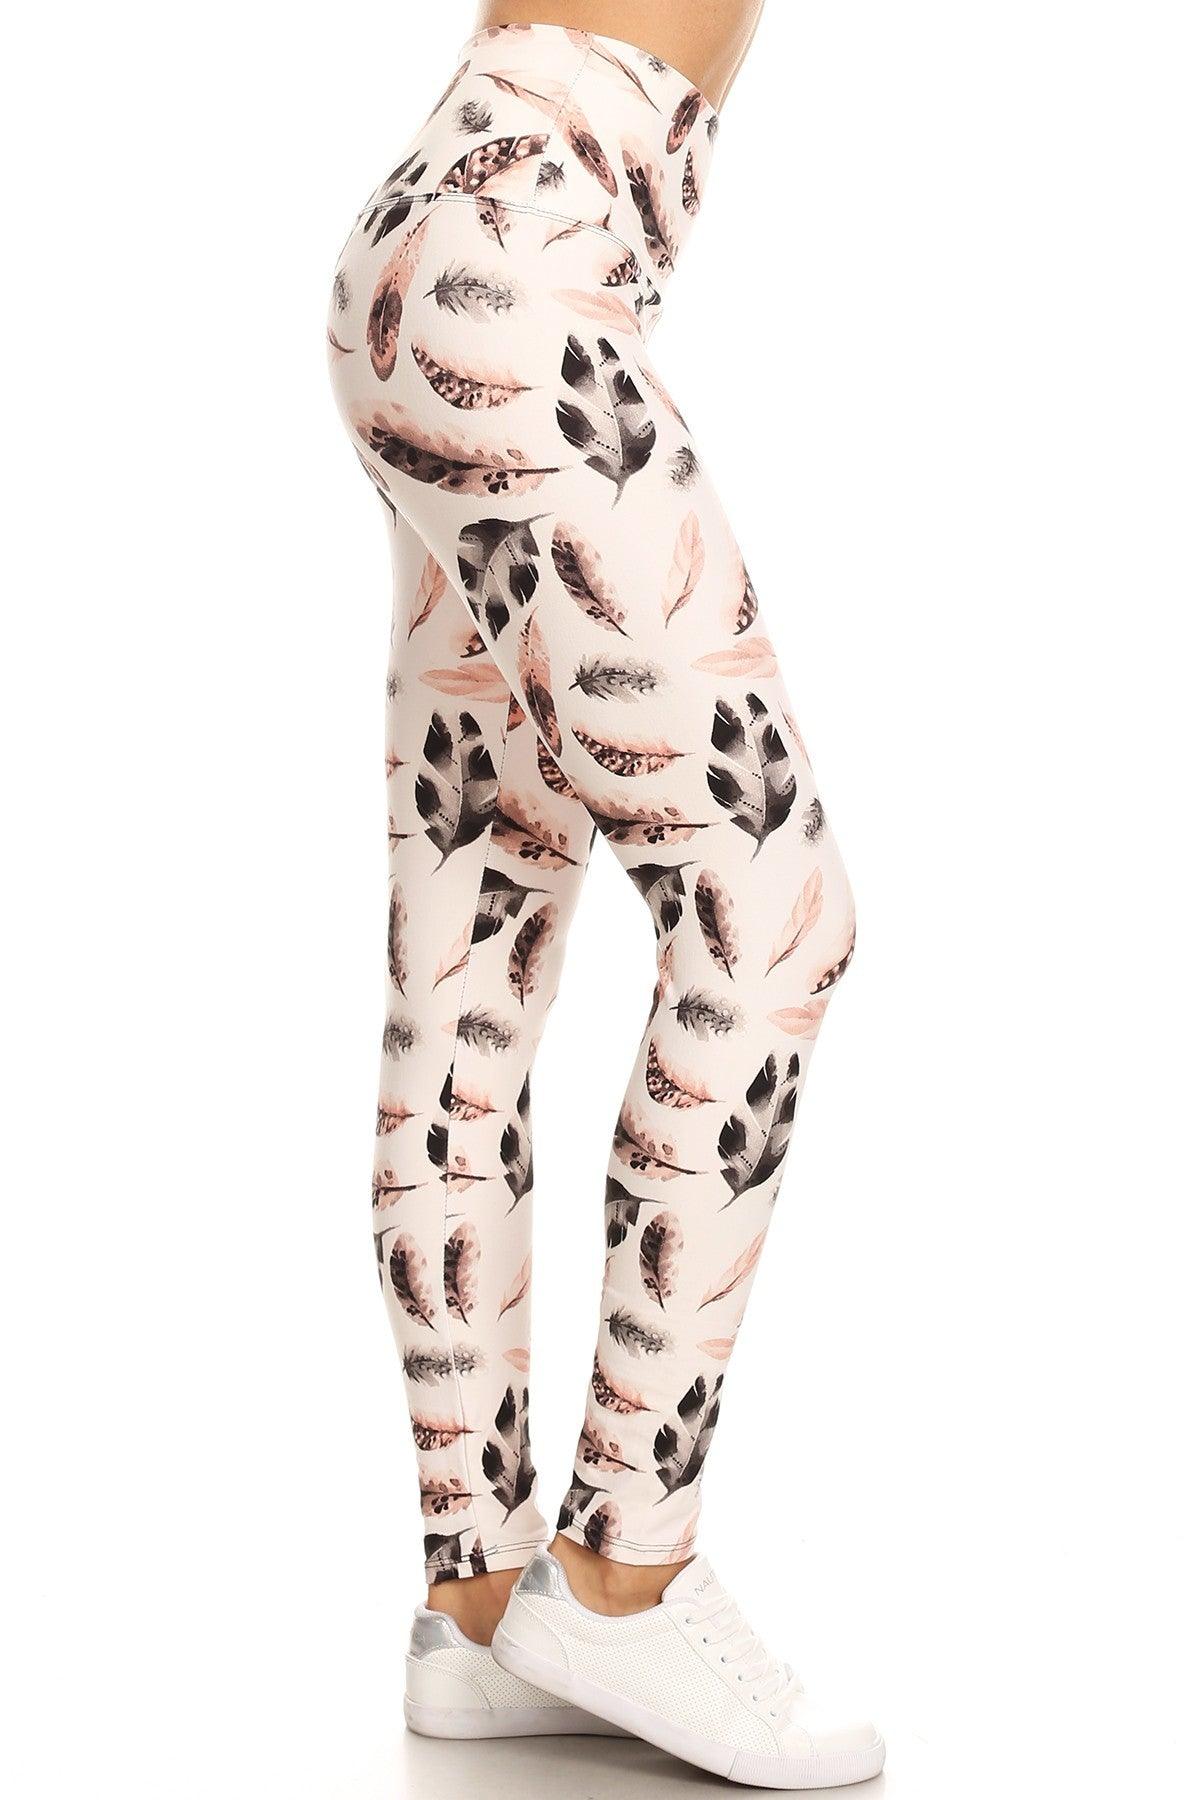 Long Yoga Style Banded Lined Leaf Printed Knit Legging With High Waist Naughty Smile Fashion